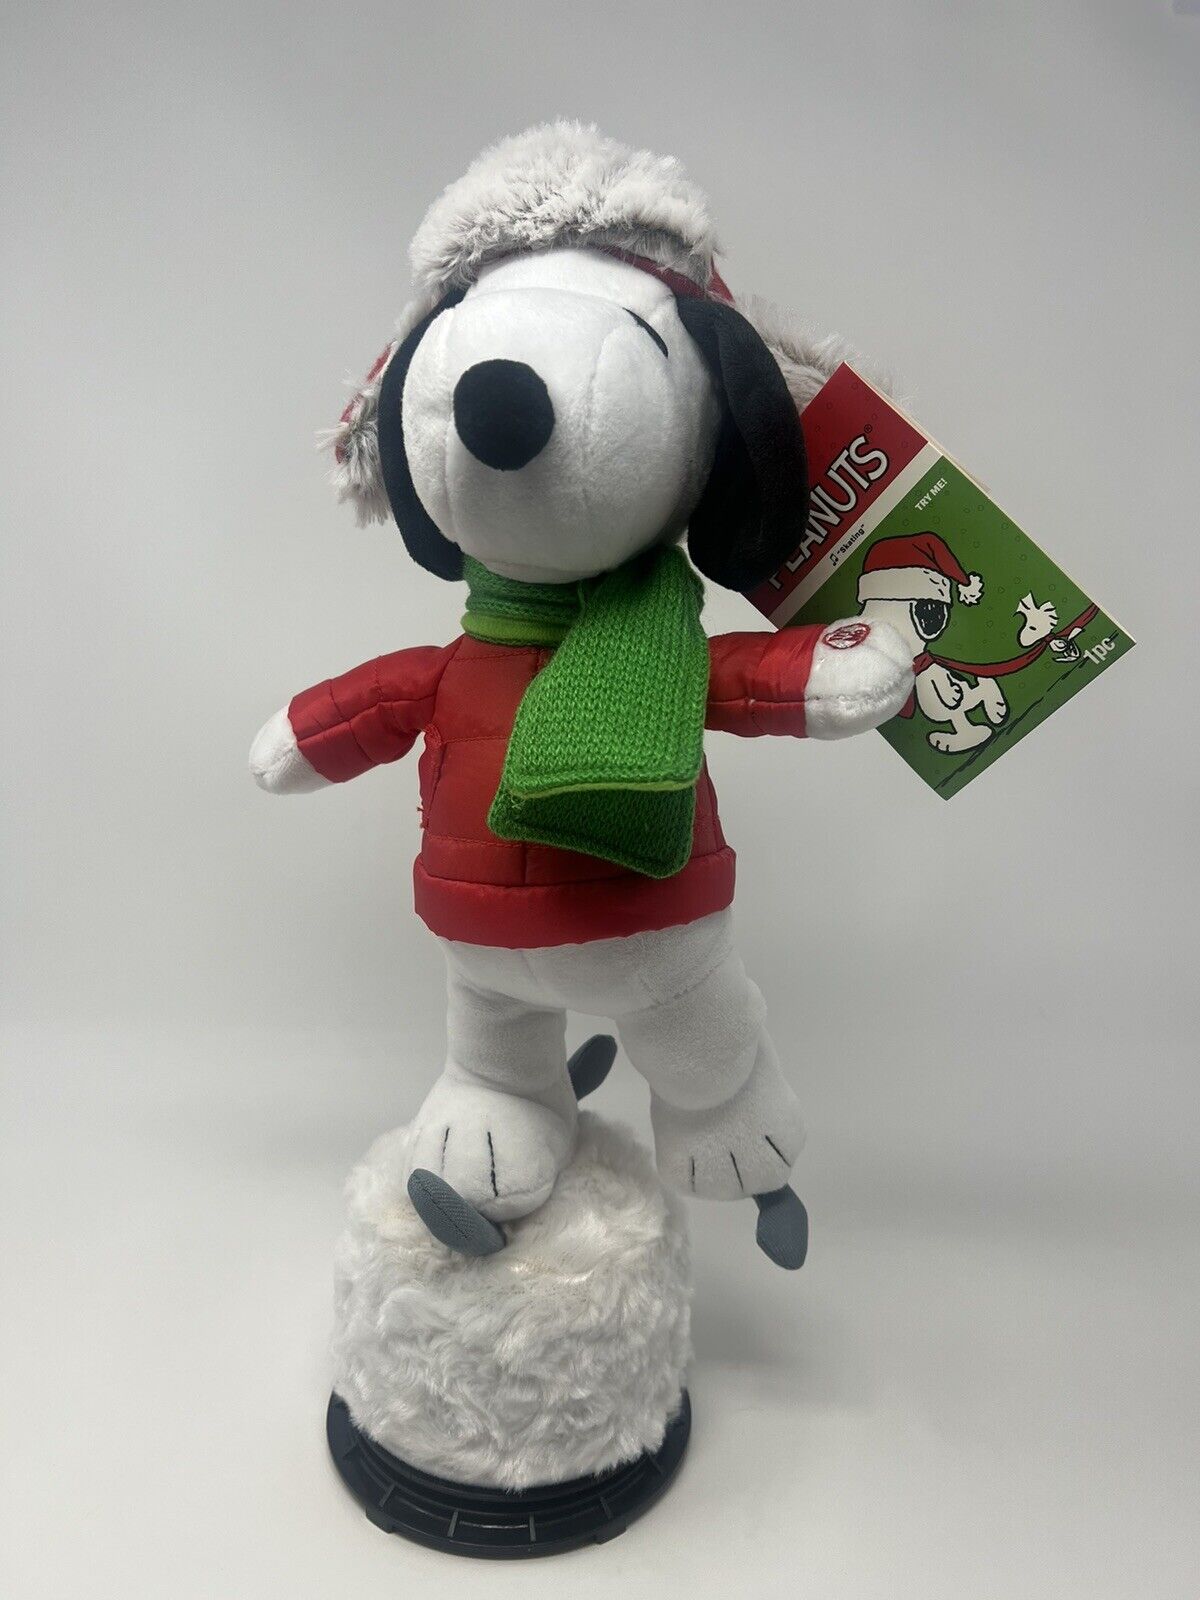 NEW Gemmy 2016 Peanuts Snoopy Animated Plush Ice Skating Spins Musical -NWT